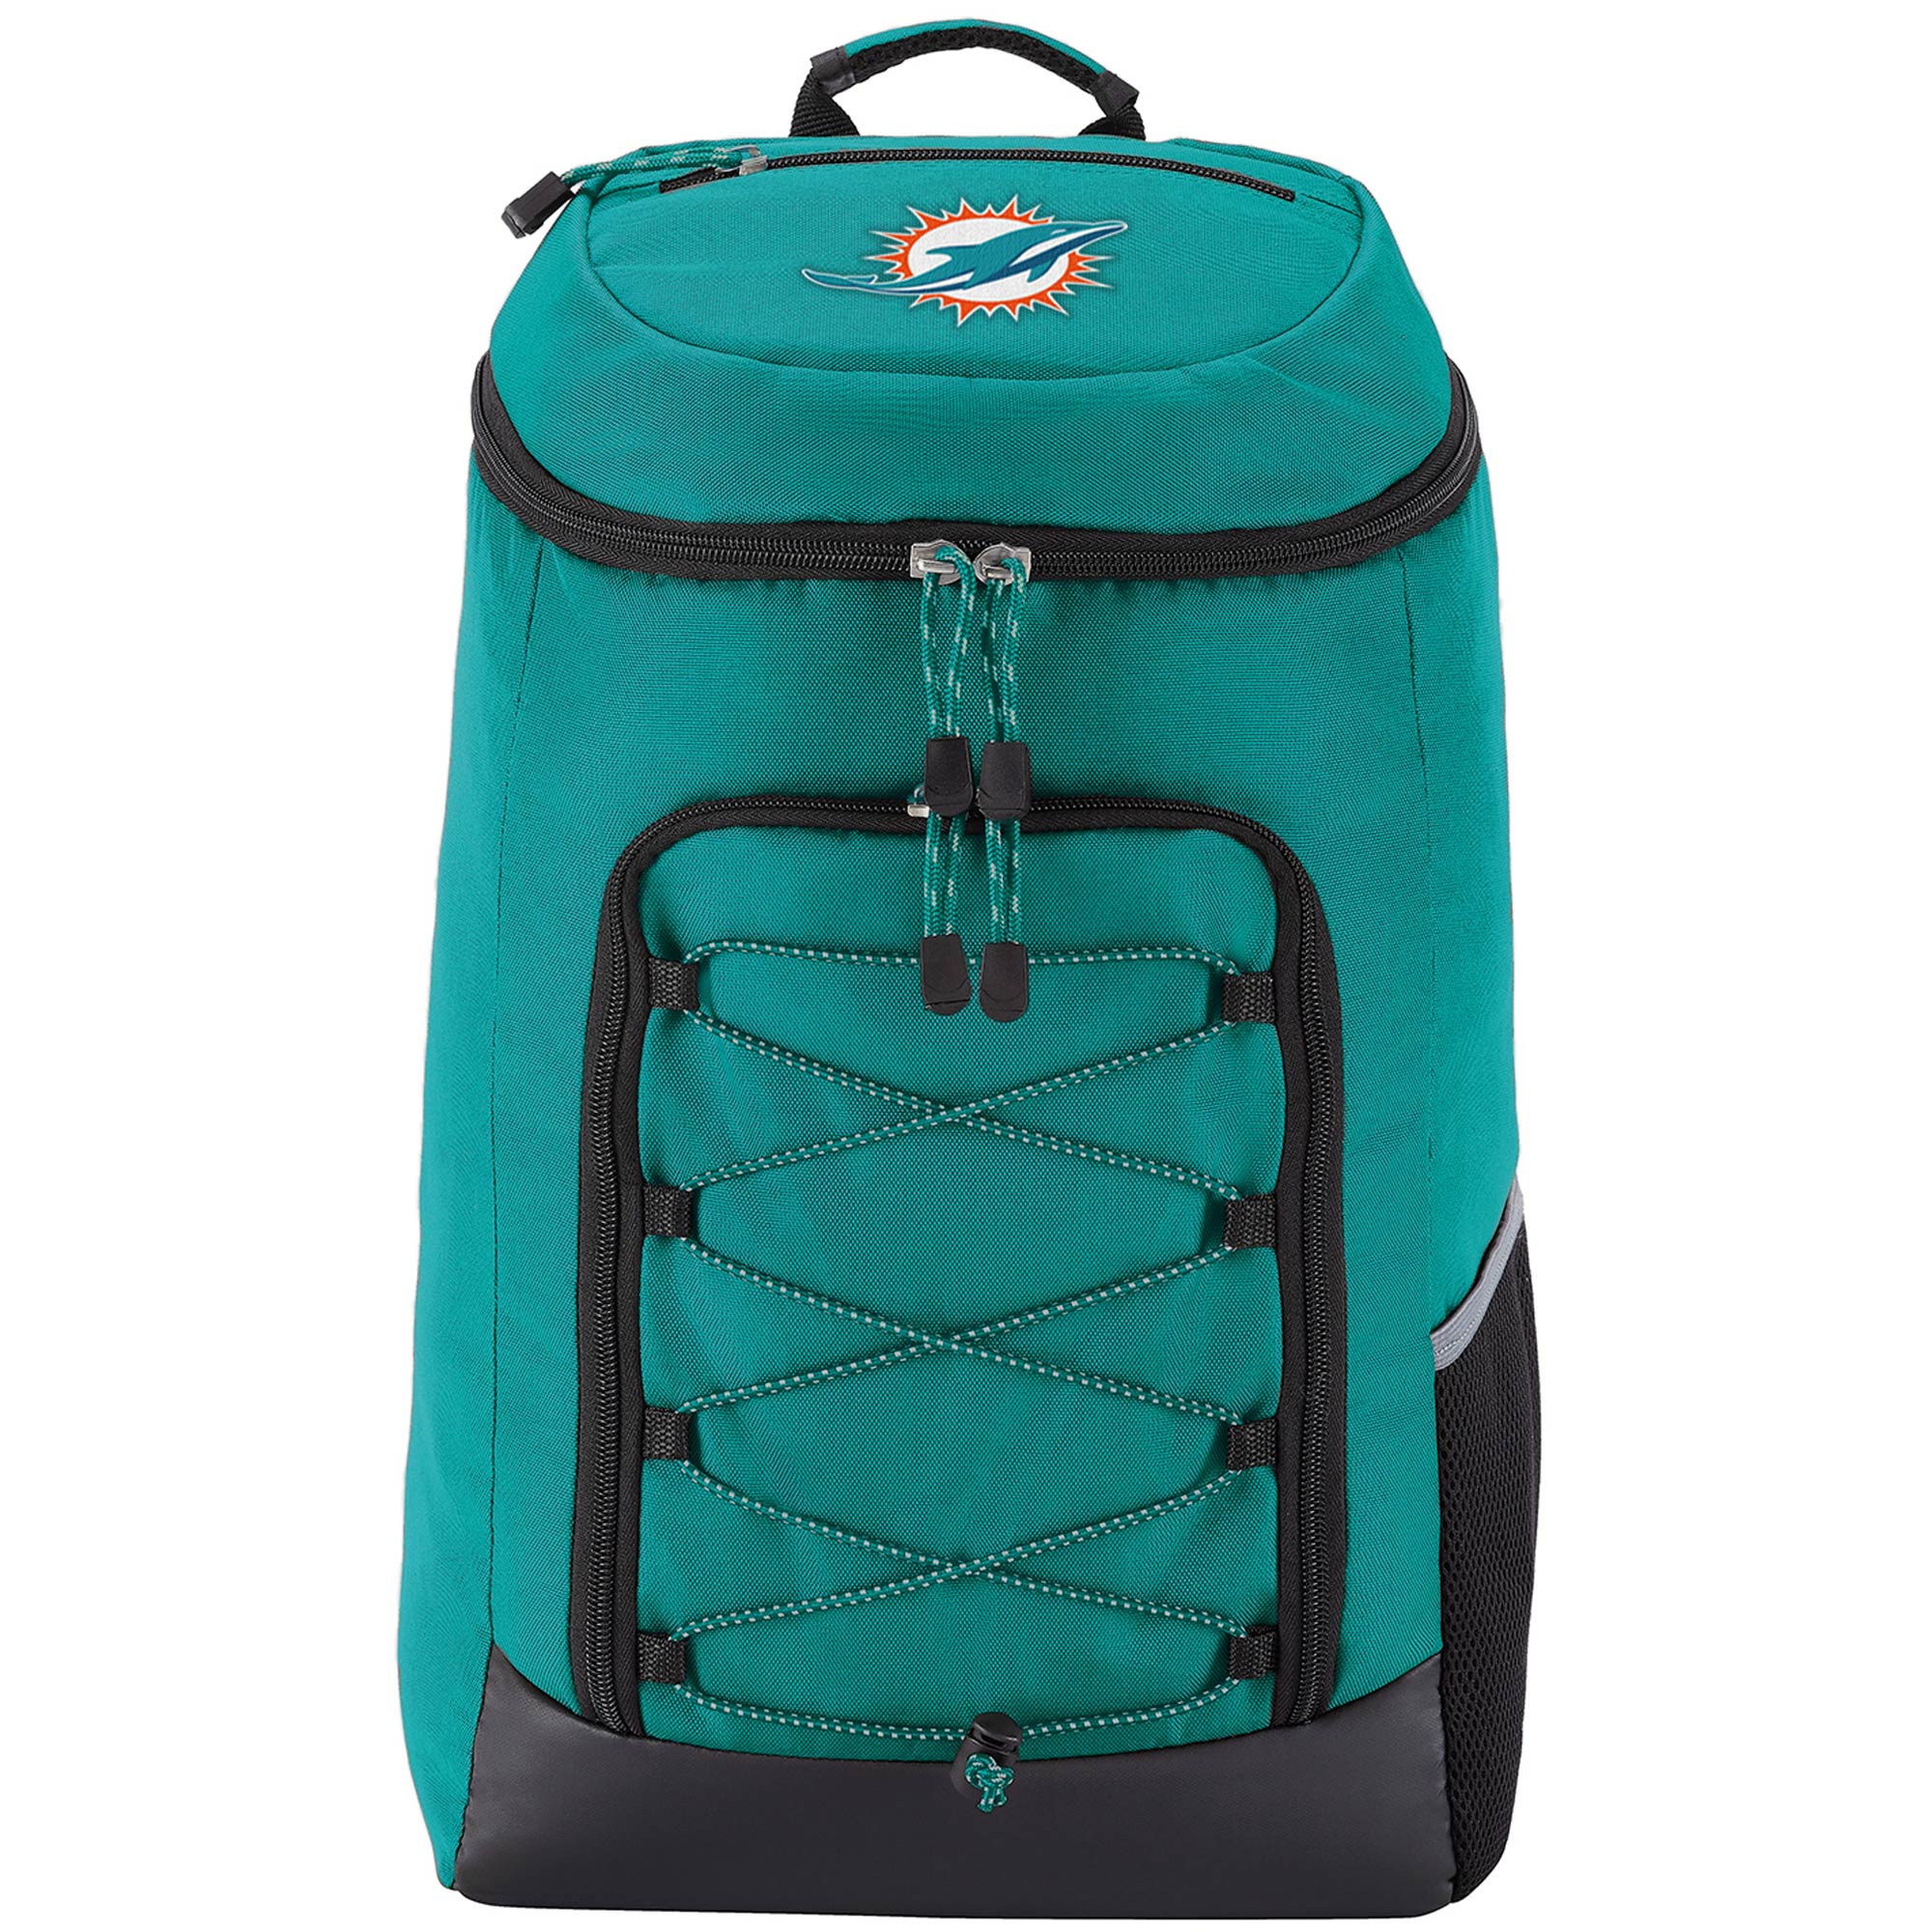 NFL Miami Dolphins "Competitor" Top-Loader Backpack, 19" x 7" x 12" - image 1 of 2